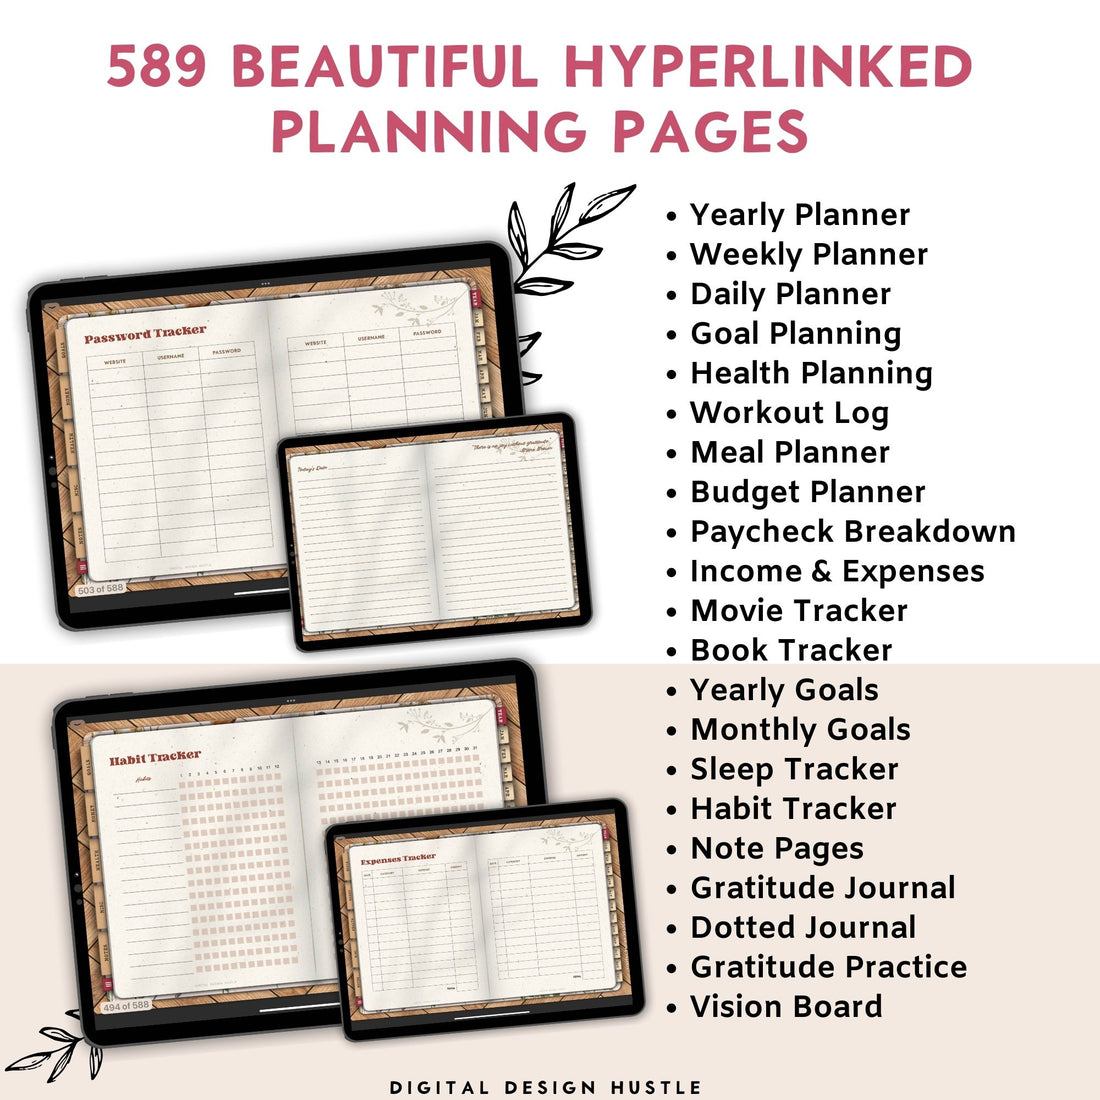 Embrace the coming year with our meticulously crafted 2024 Ultimate Fab Life Digital Planner. This comprehensive 589-page planner is your indispensable companion for the year ahead, featuring a thoughtfully structured hyperlinked 365-day planner complete with yearly, weekly, and daily planning pages.